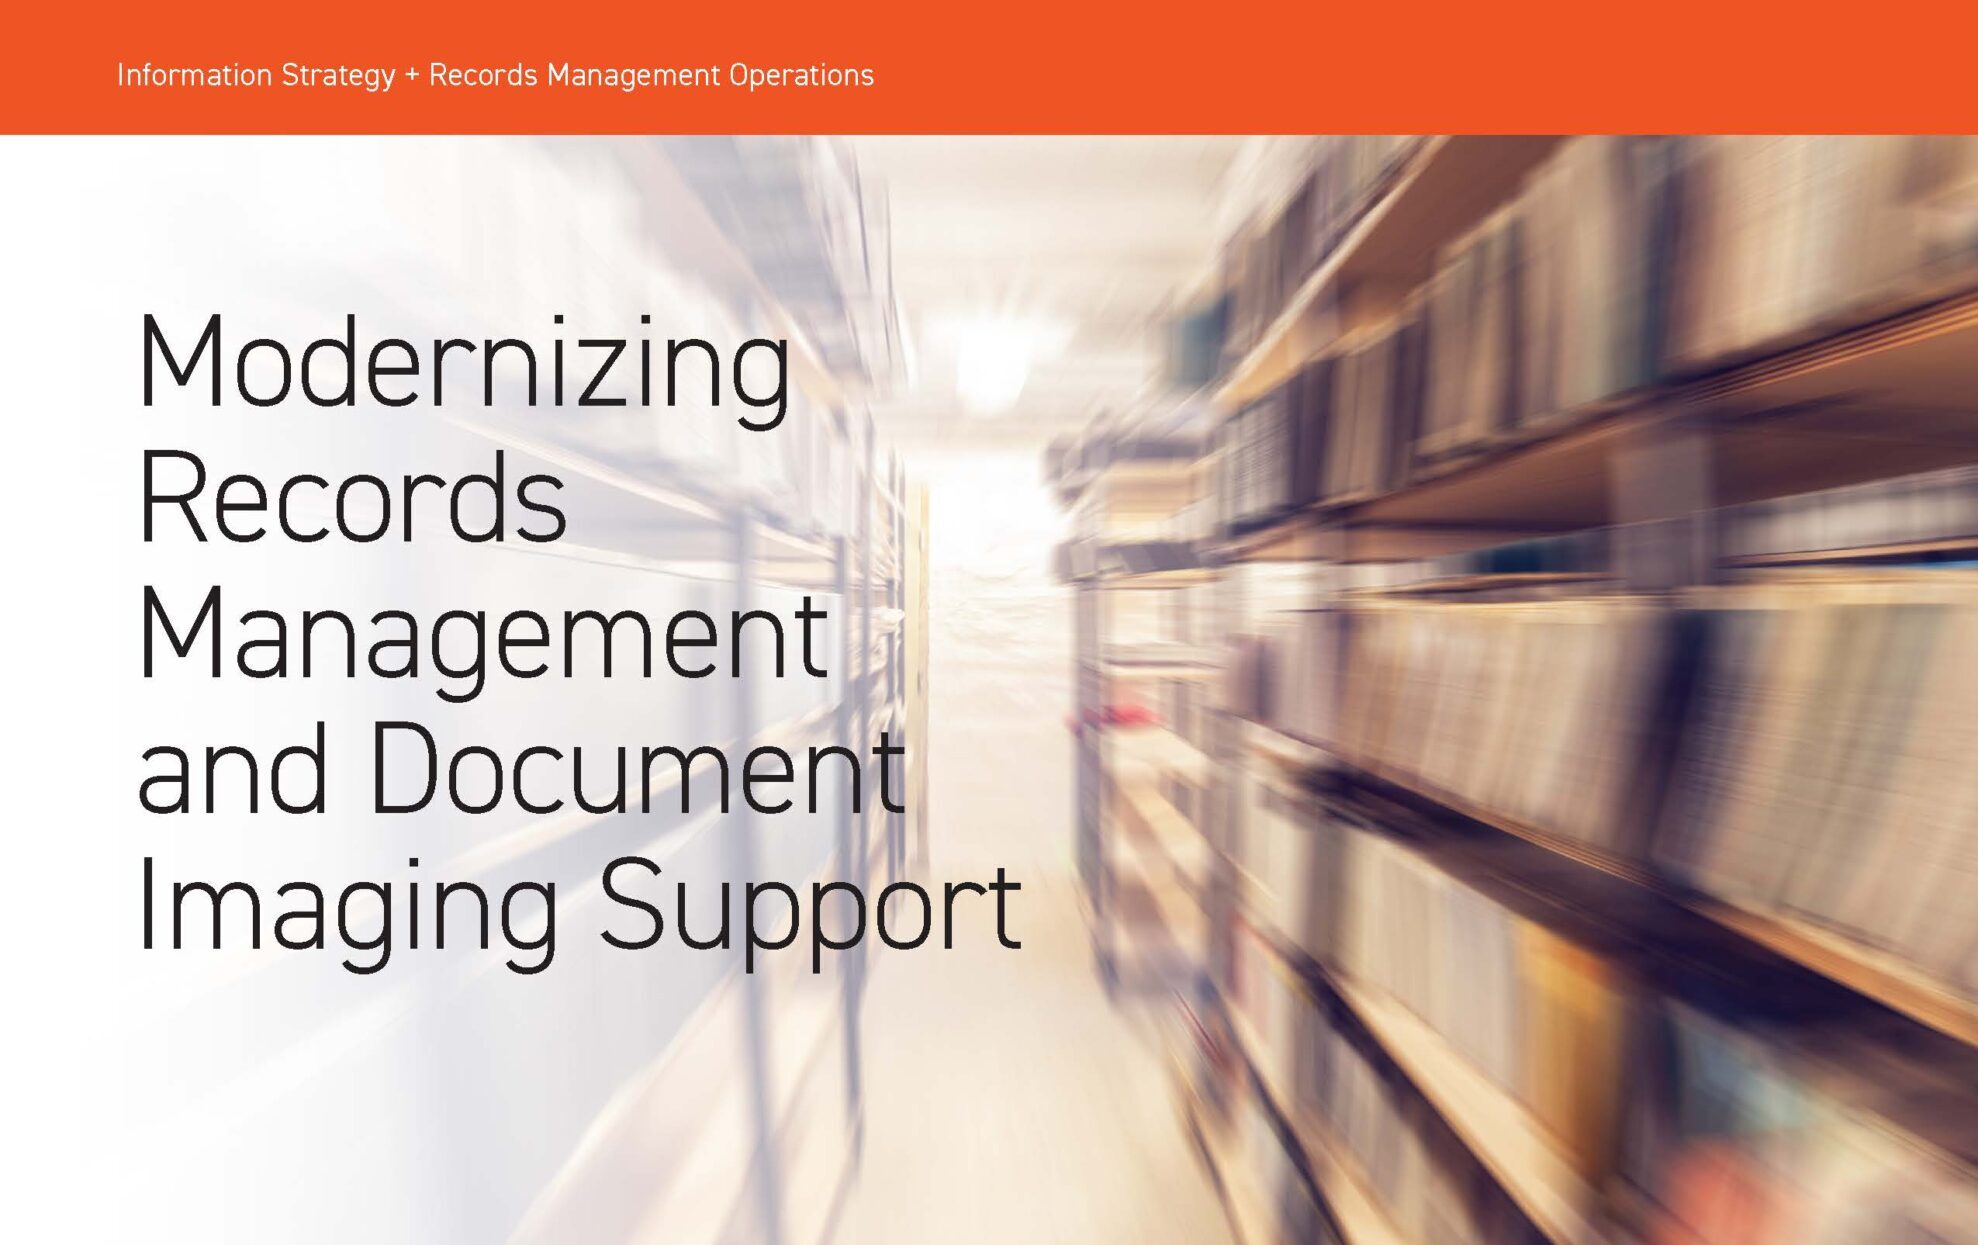 At Access Sciences, Records management is focused on what you must do to protect and manage records throughout their lifecycle.